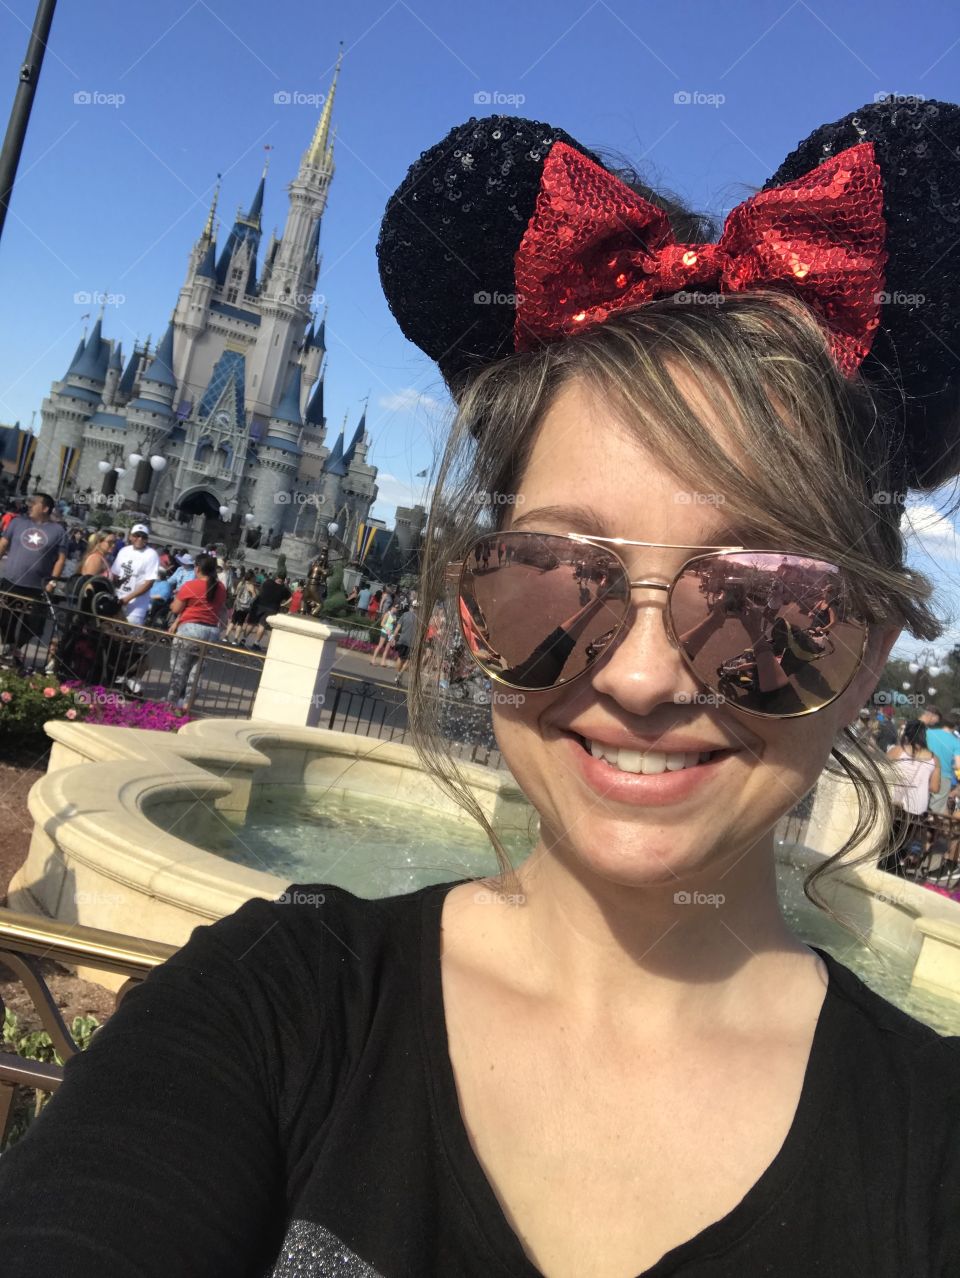 Female at Disney with sequined ears